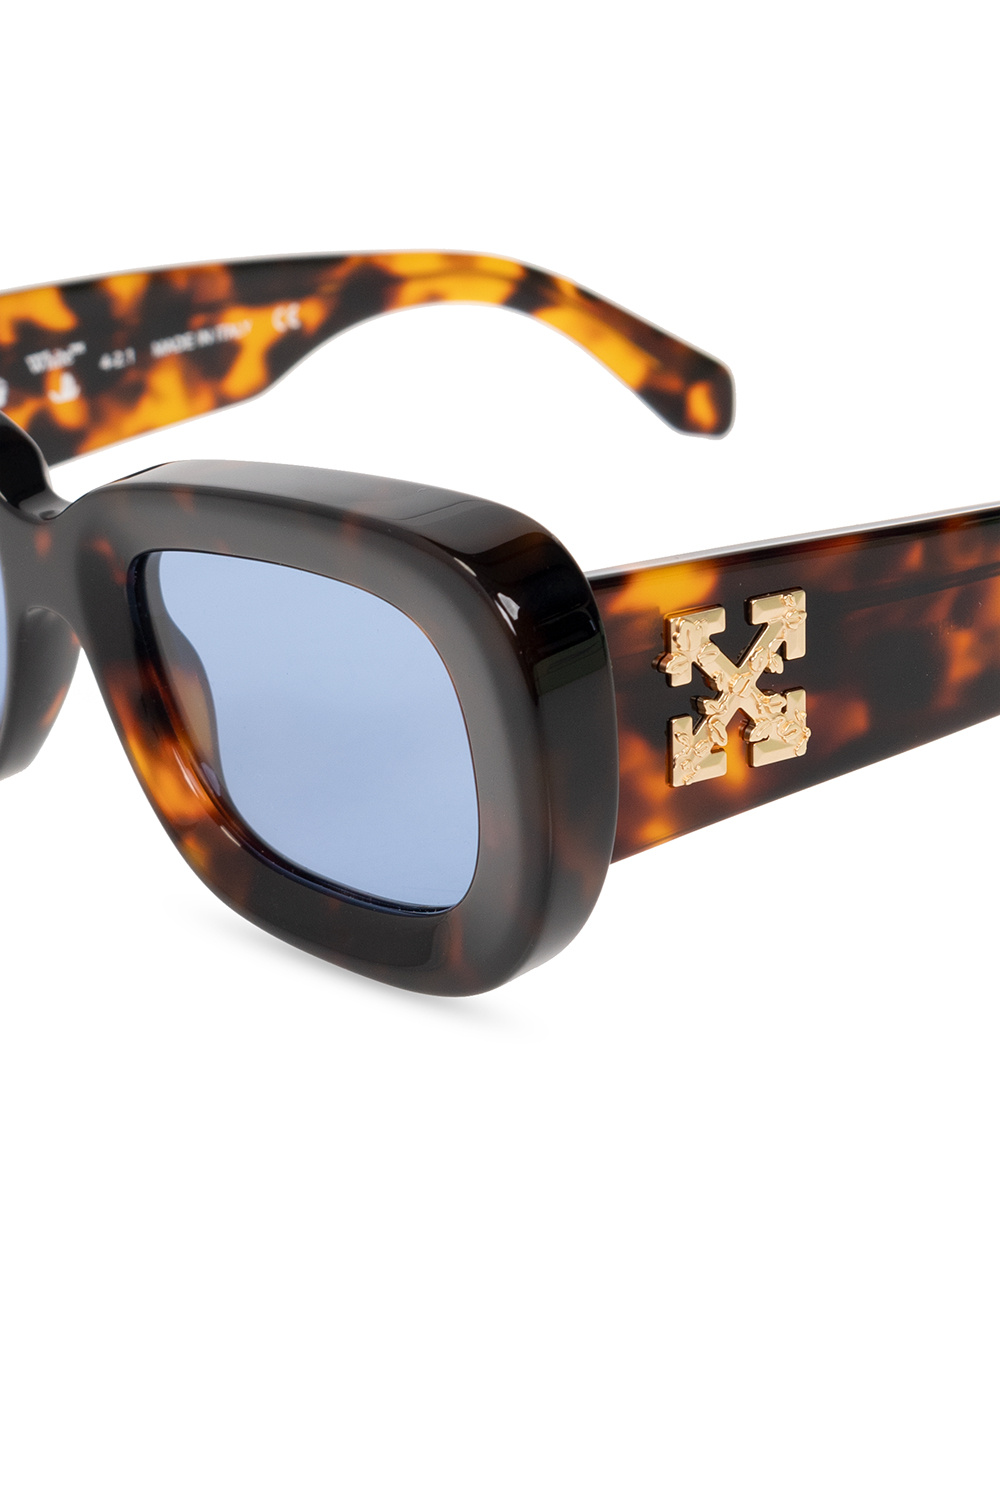 Off-White™ Marble-effect sunglasses